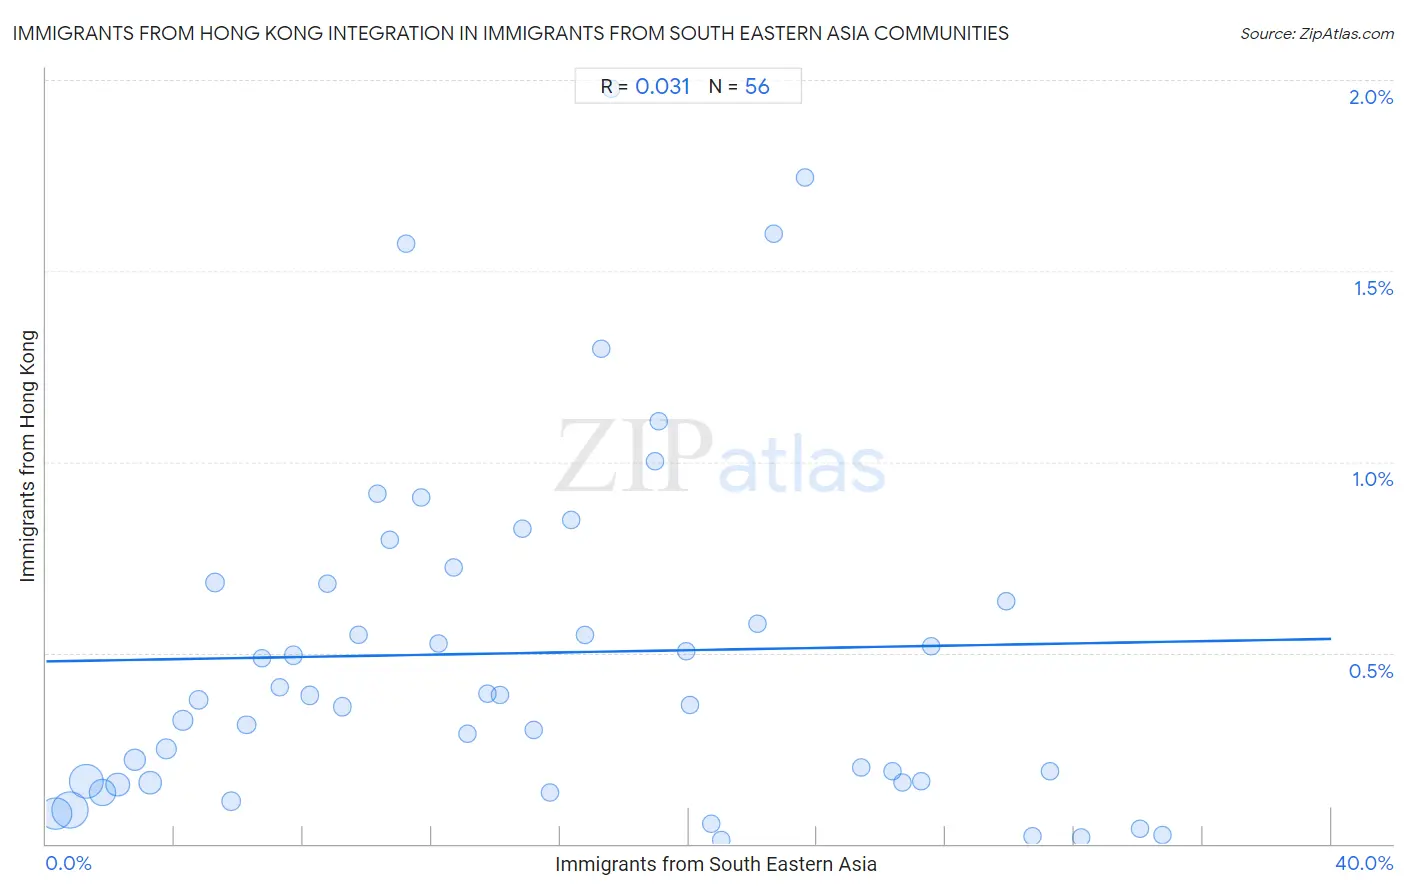 Immigrants from South Eastern Asia Integration in Immigrants from Hong Kong Communities